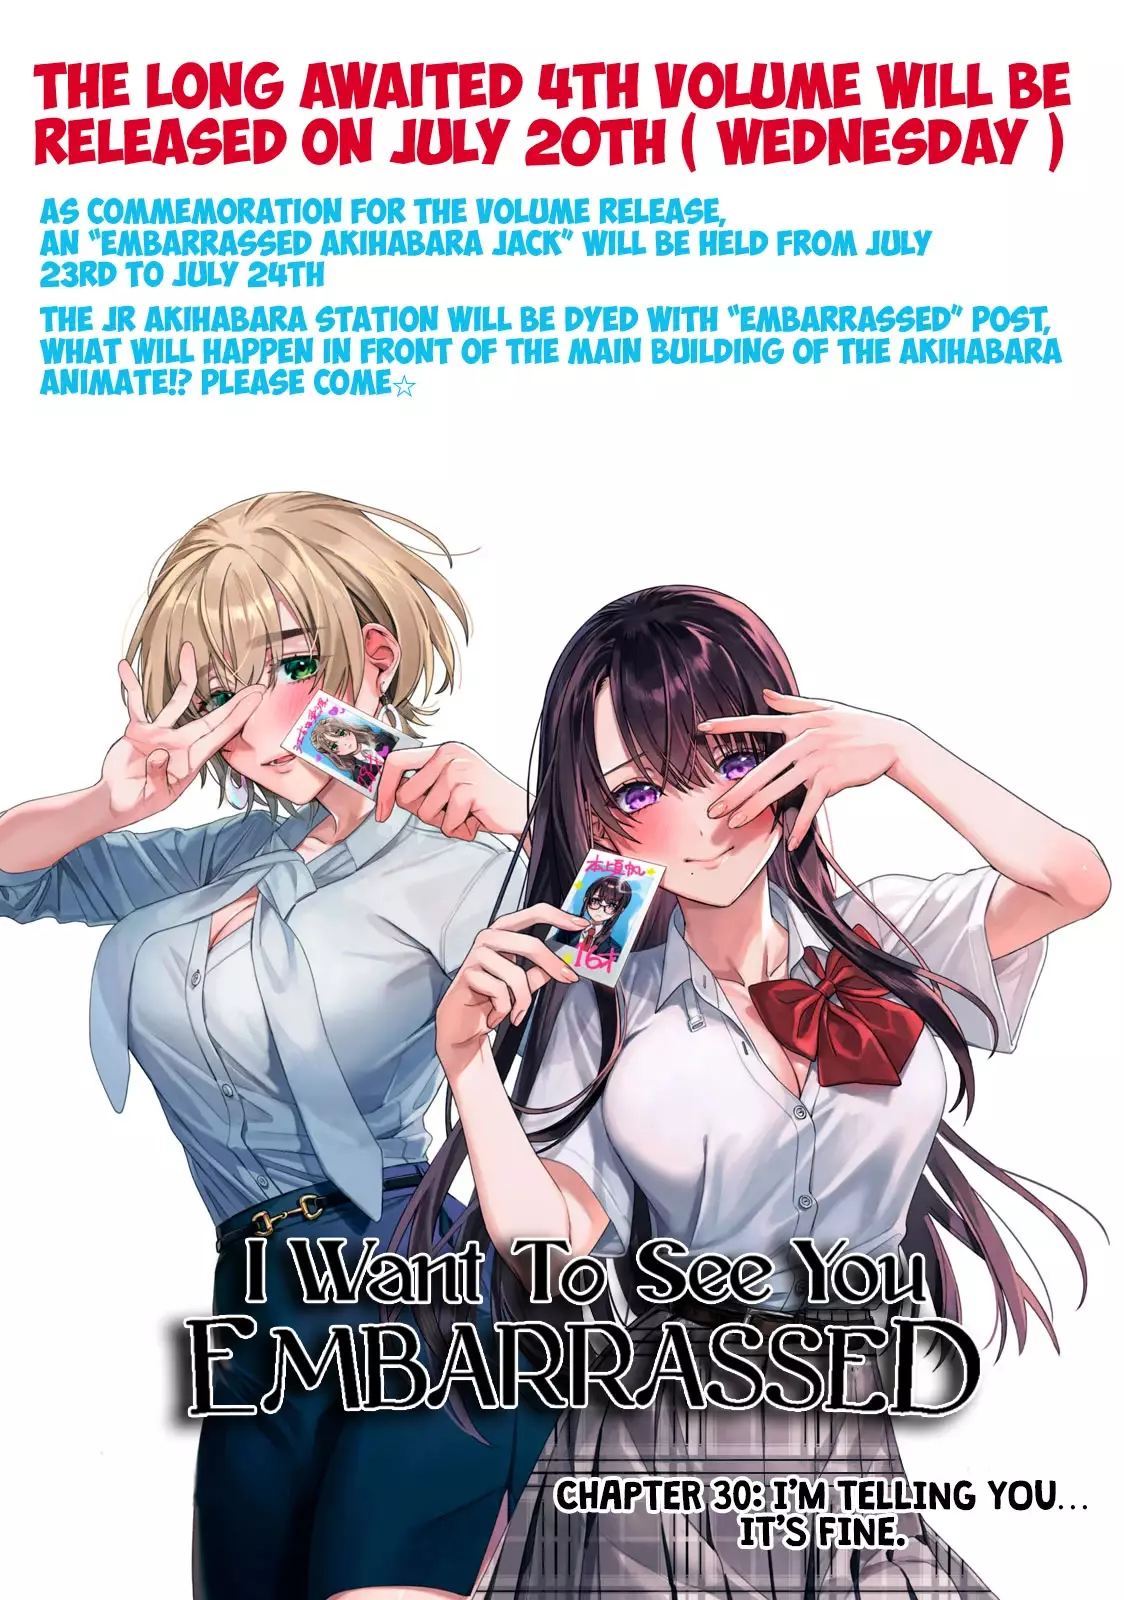 I Want To See You Embarassed - 30 page 4-e6464391